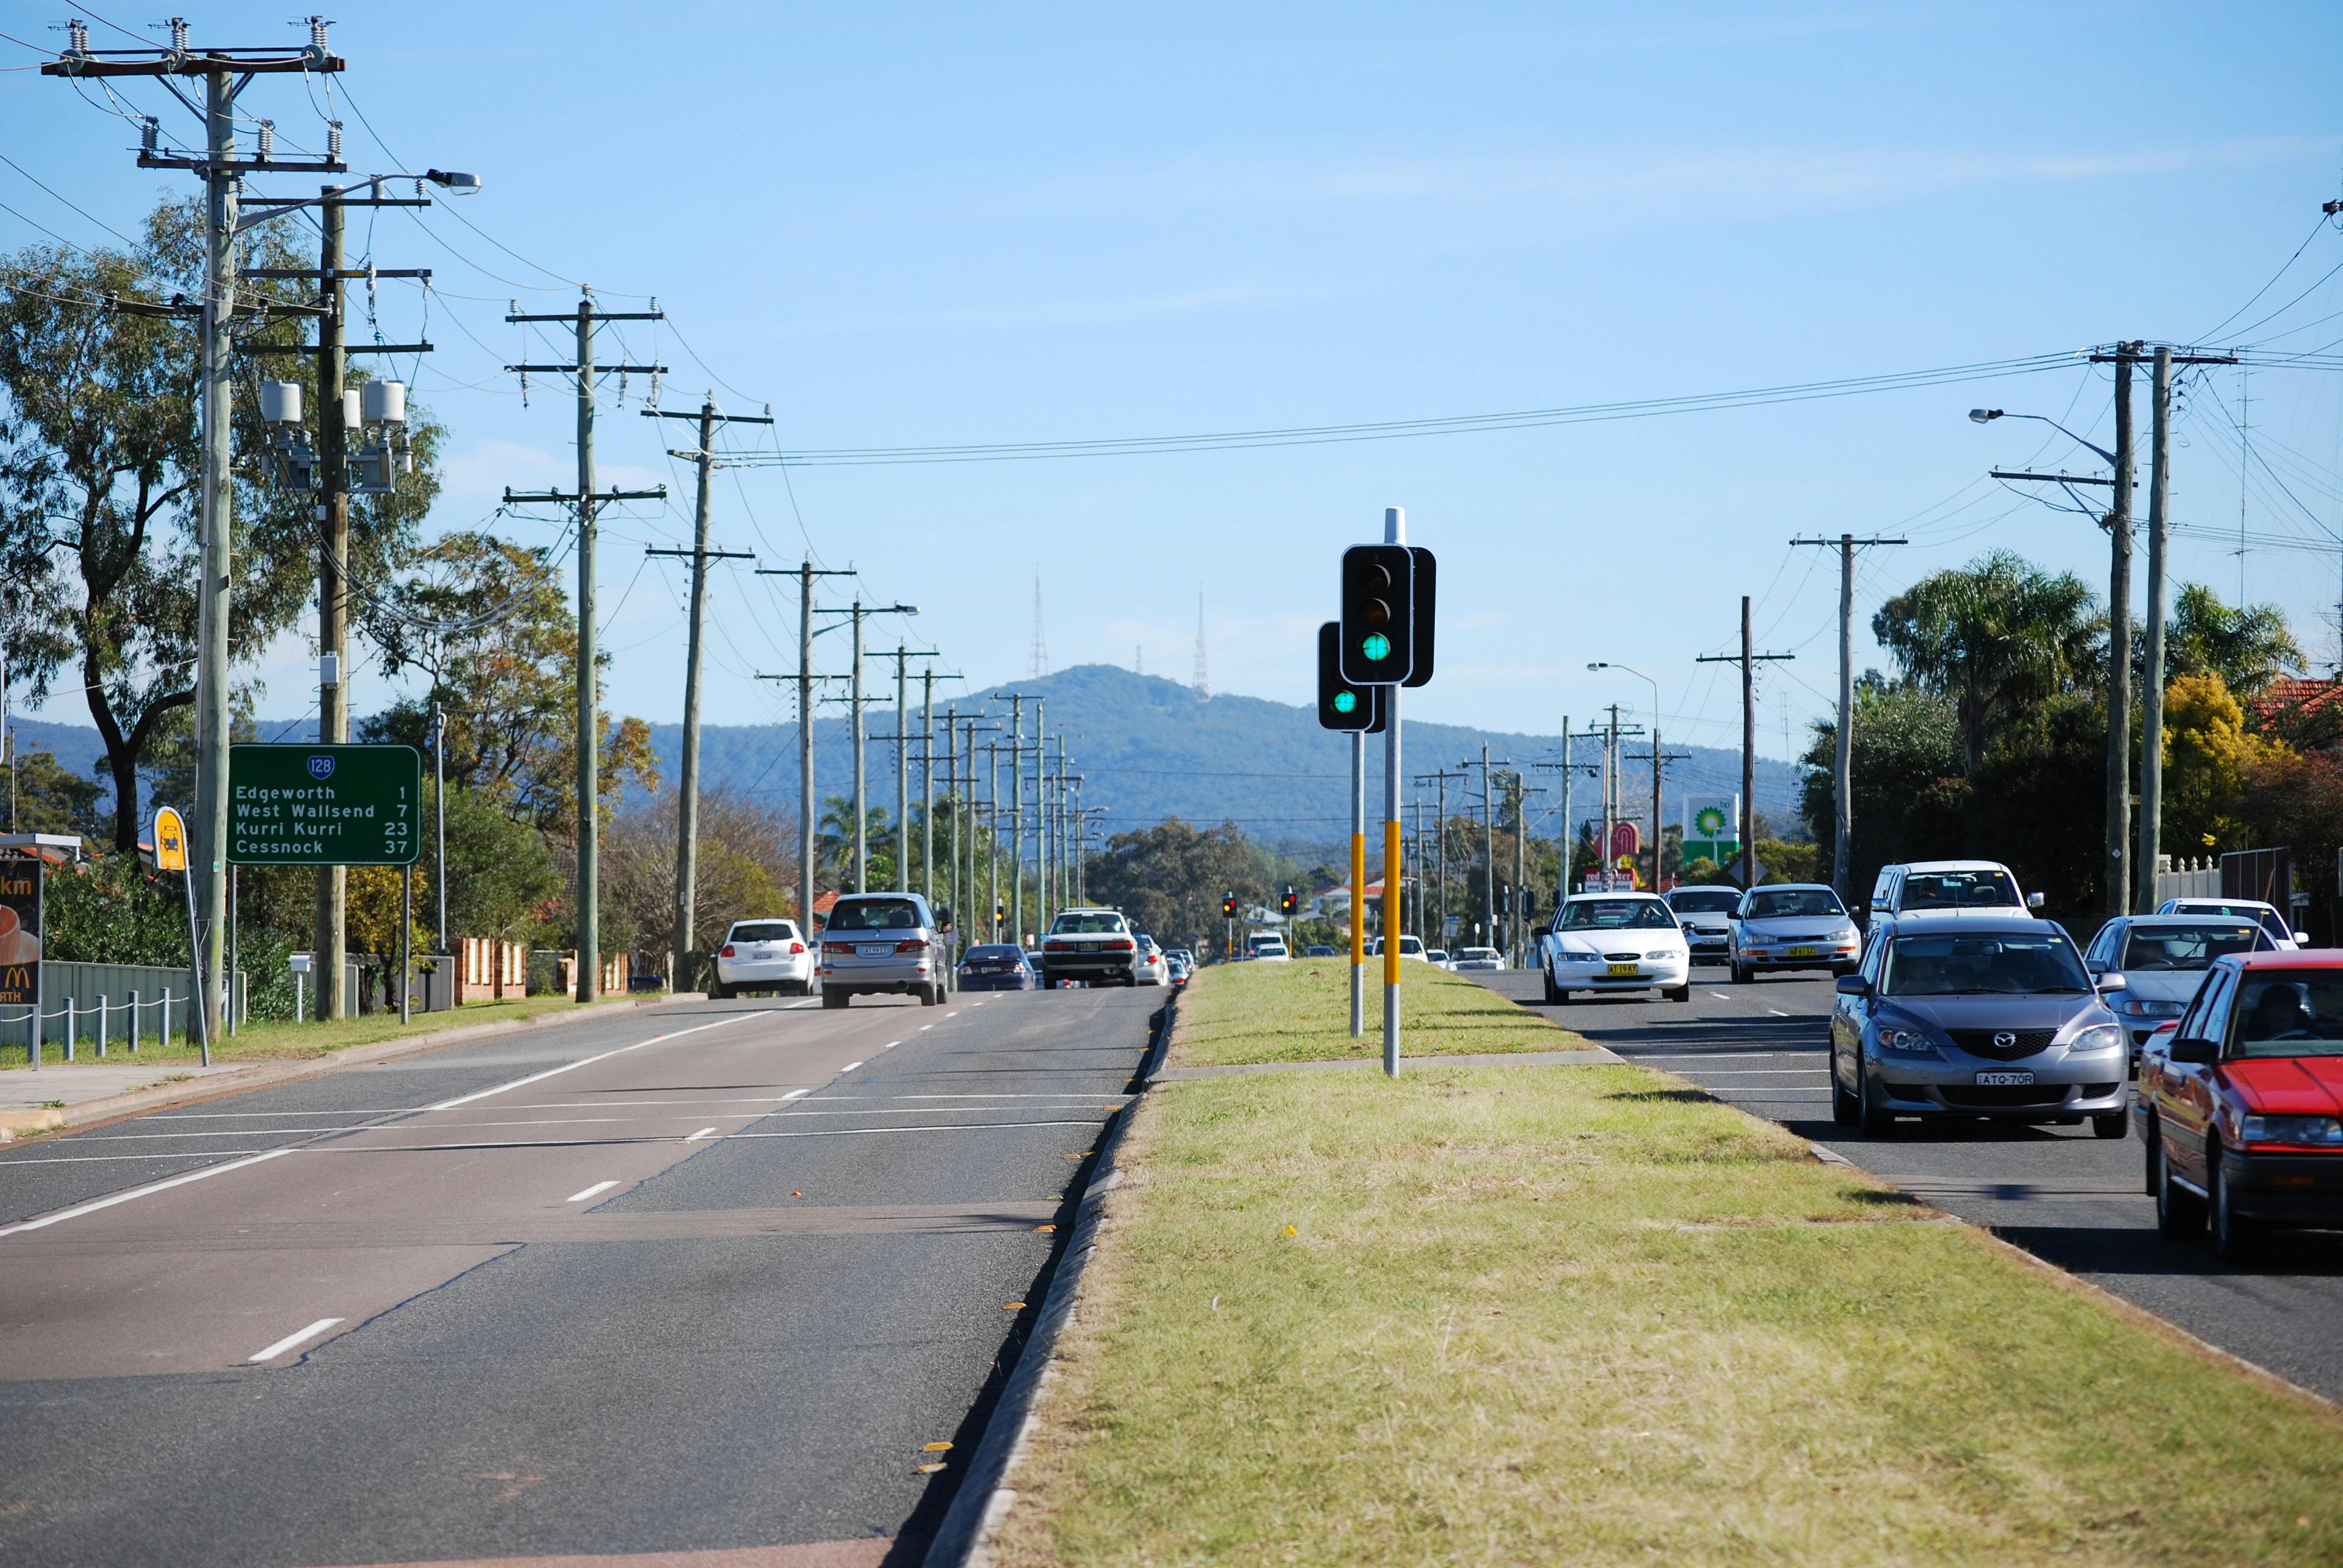 Mount Sugarloaf from Main Road